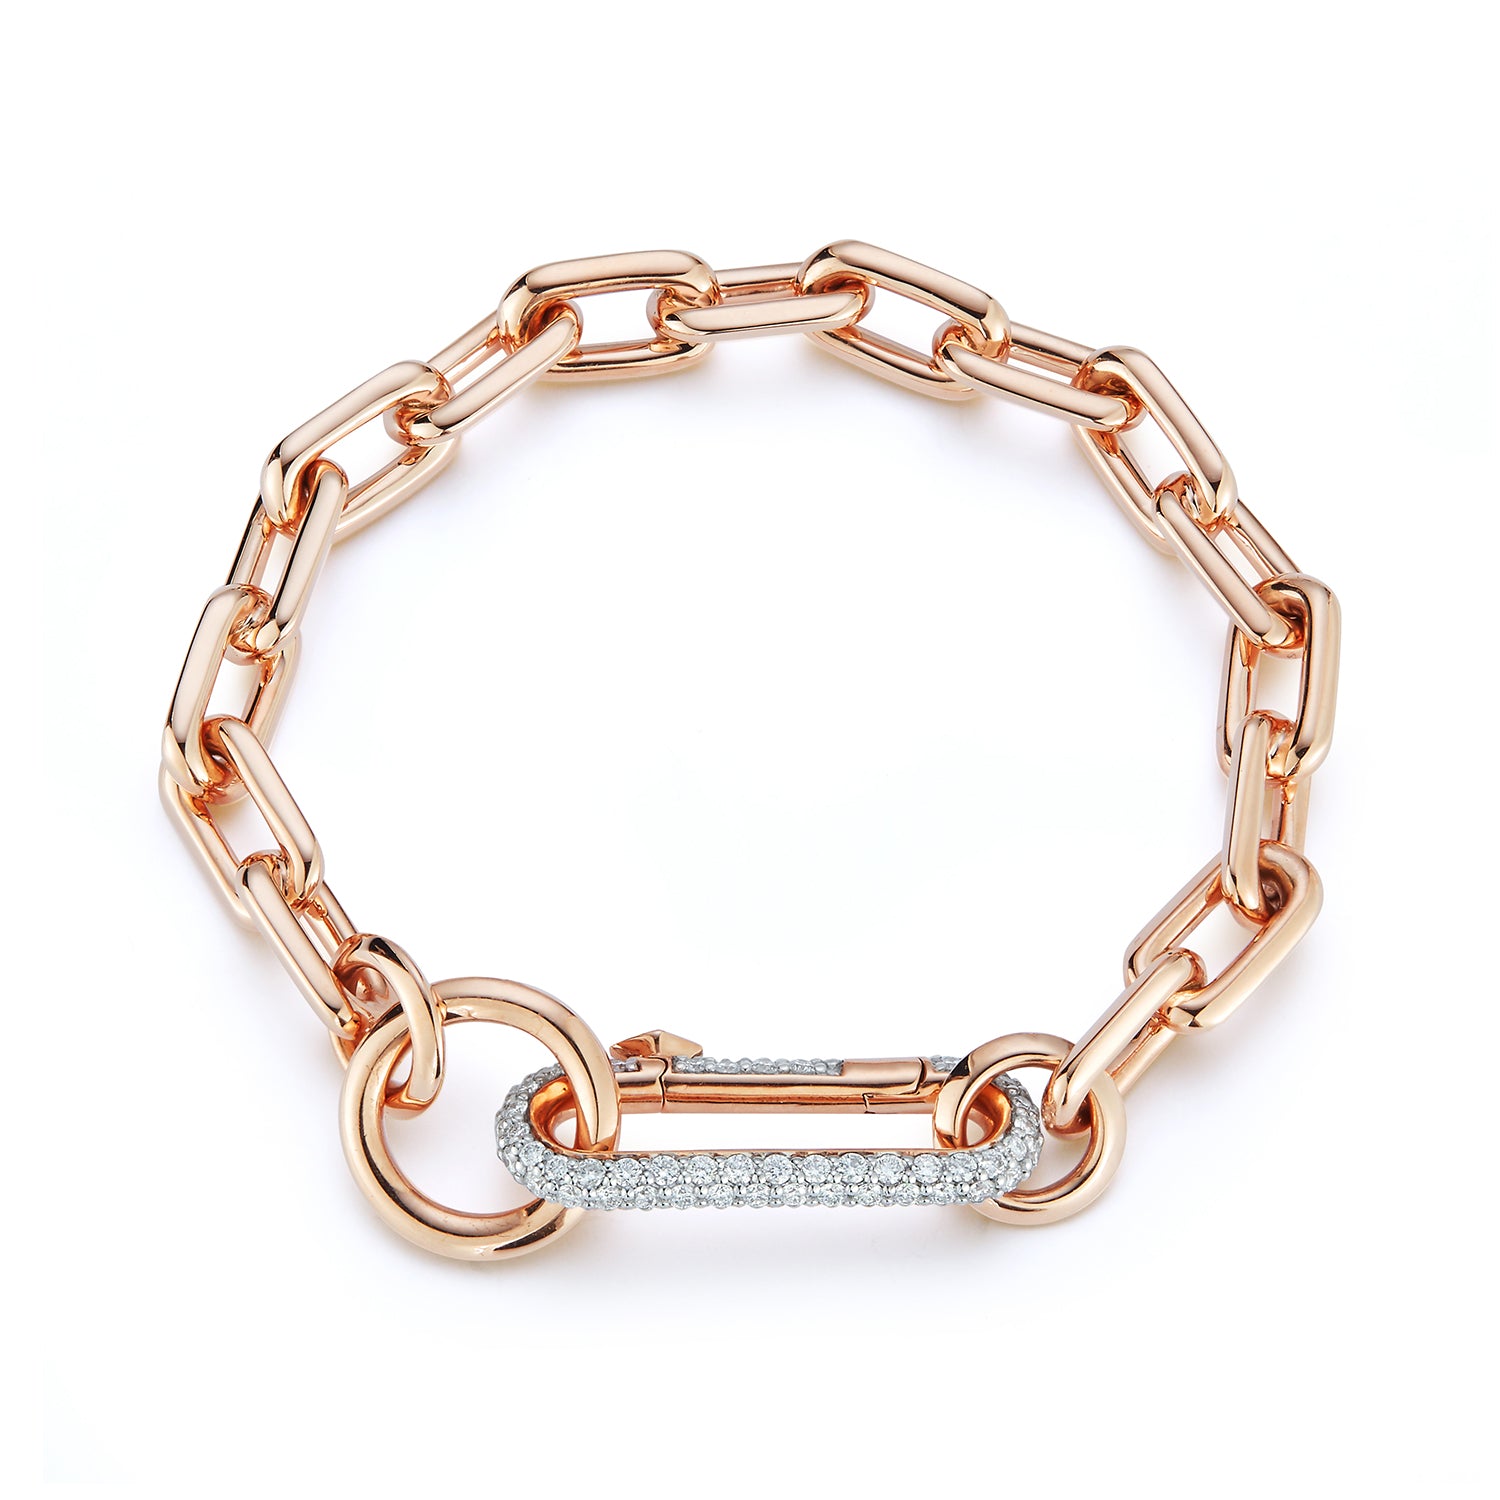 CLIVE 18K ROSE GOLD AND DIAMOND EDGE FLUTED CUFF BANGLE